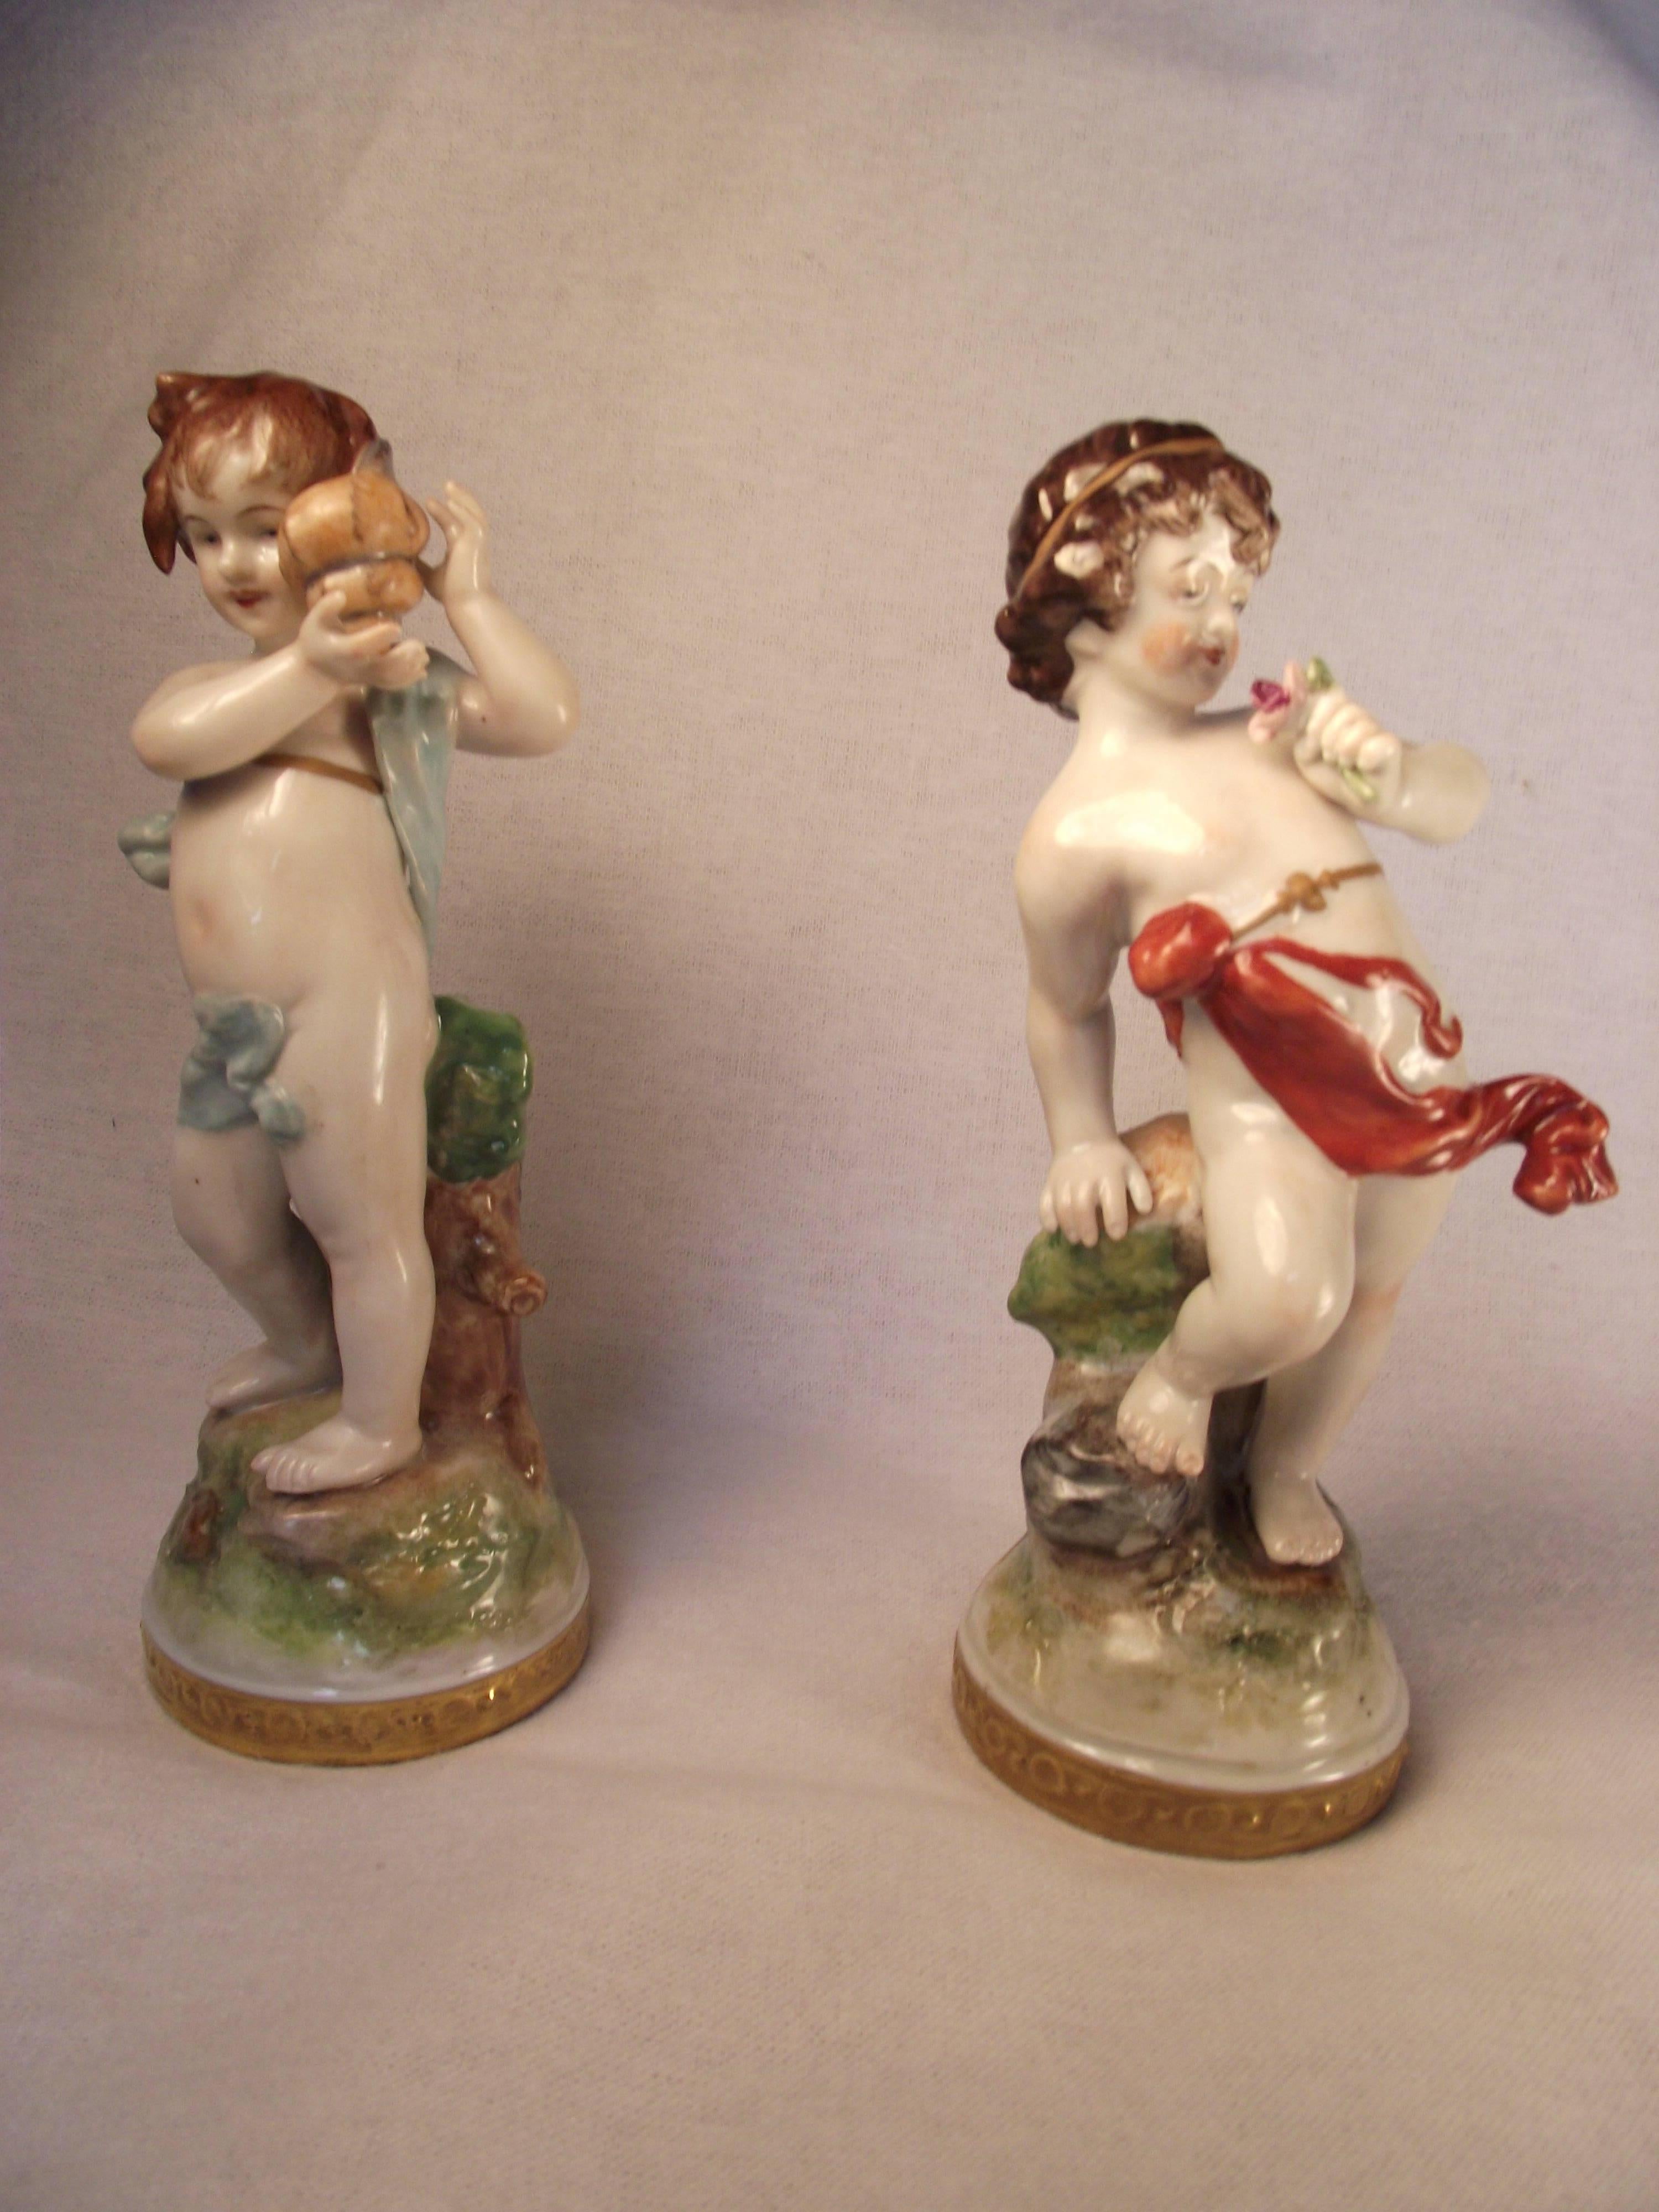 Two charming antique figurines in absolutely perfect condition bearing the oldest Volkstedt Factory Porcelain mark. One is holding flowers and one listening to a sea shell. Exquisitely hand-painted with gold trimmed base. No chips scratches or